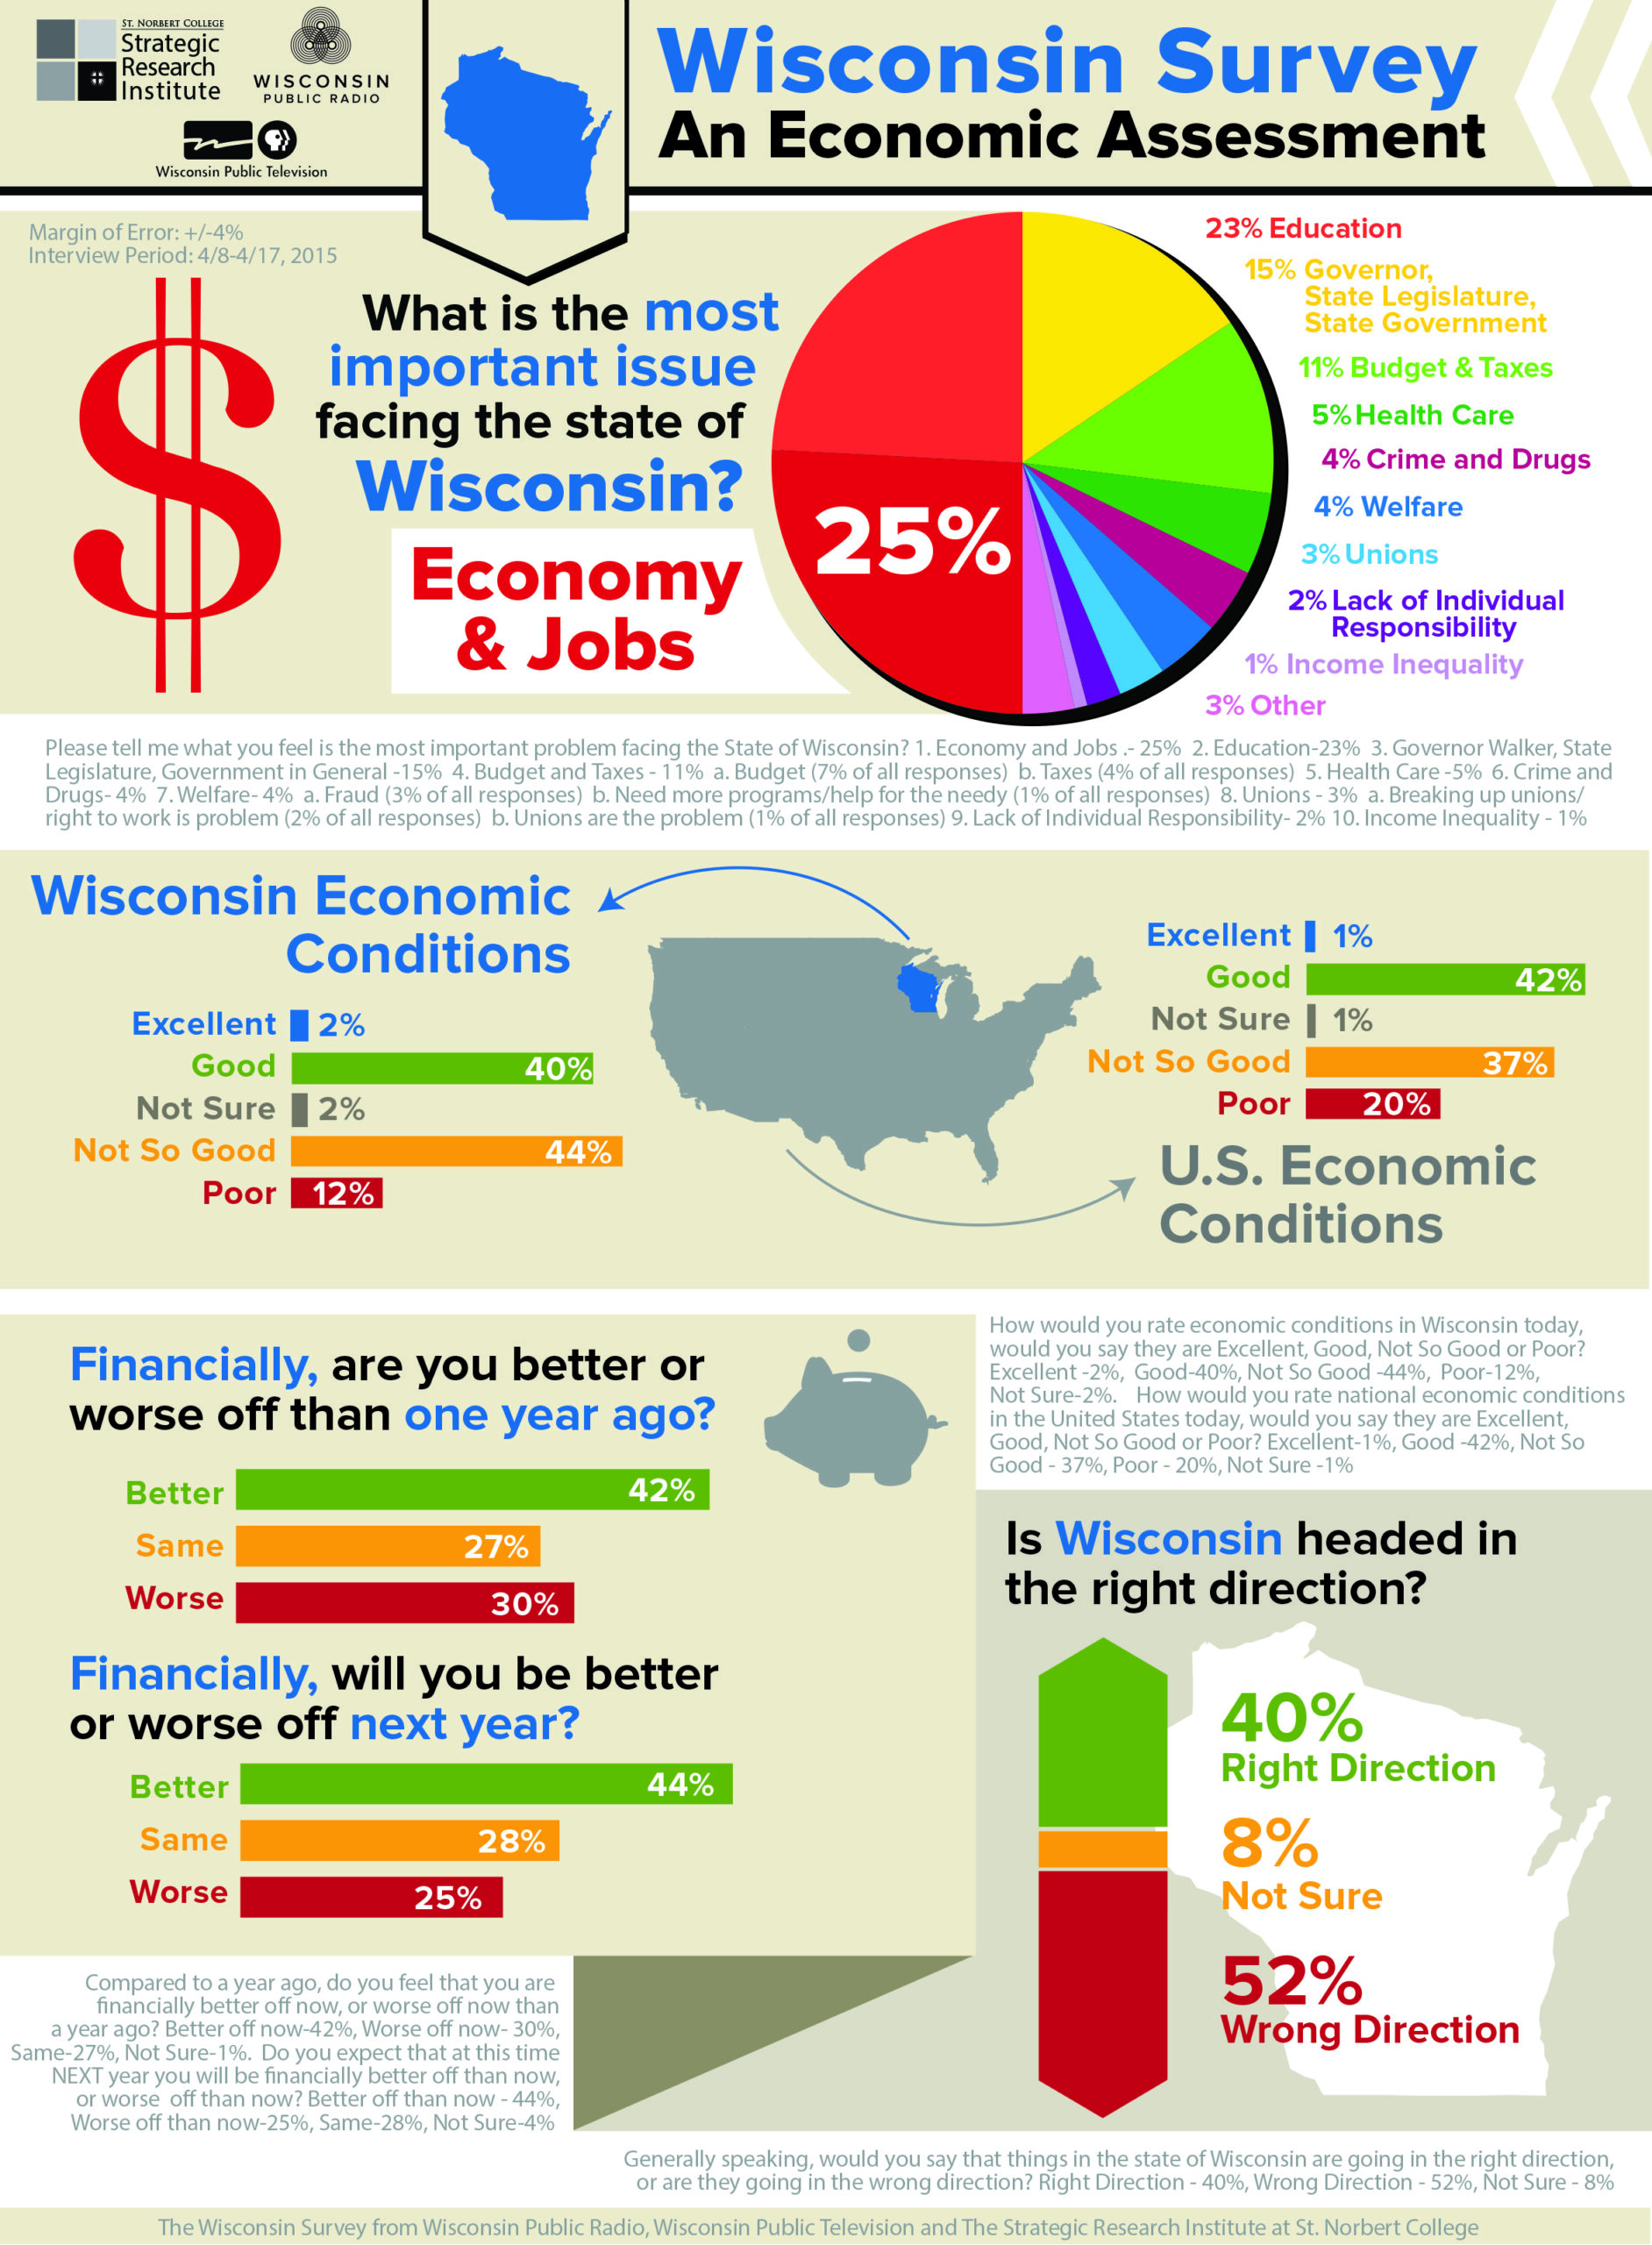 Read Full Coverage Of Wisconsin Survey’s Spring 2015